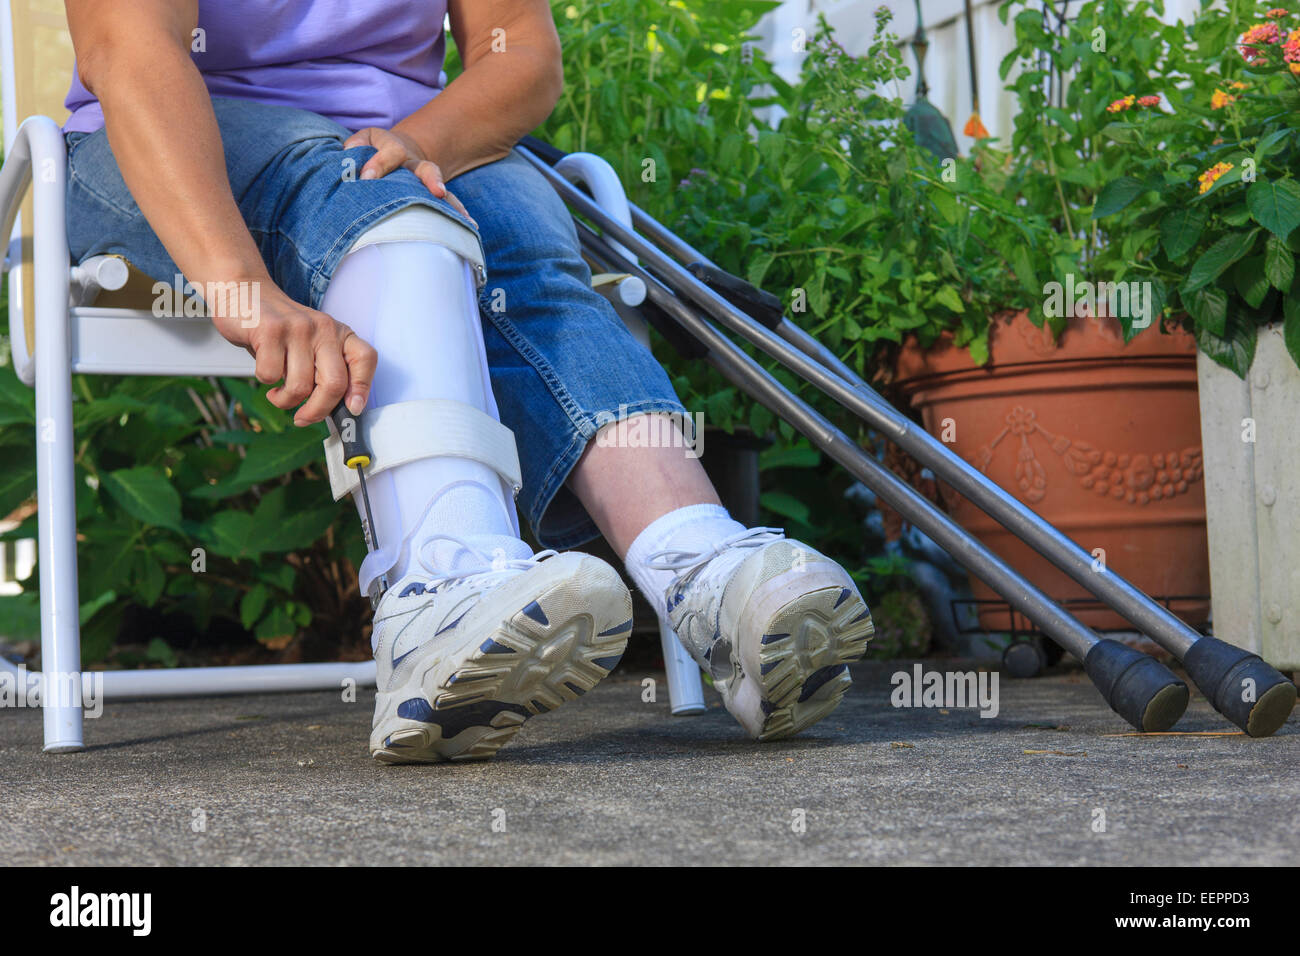 Female buckling knee orthosis or knee support brace after surgery on leg  19655550 Stock Photo at Vecteezy